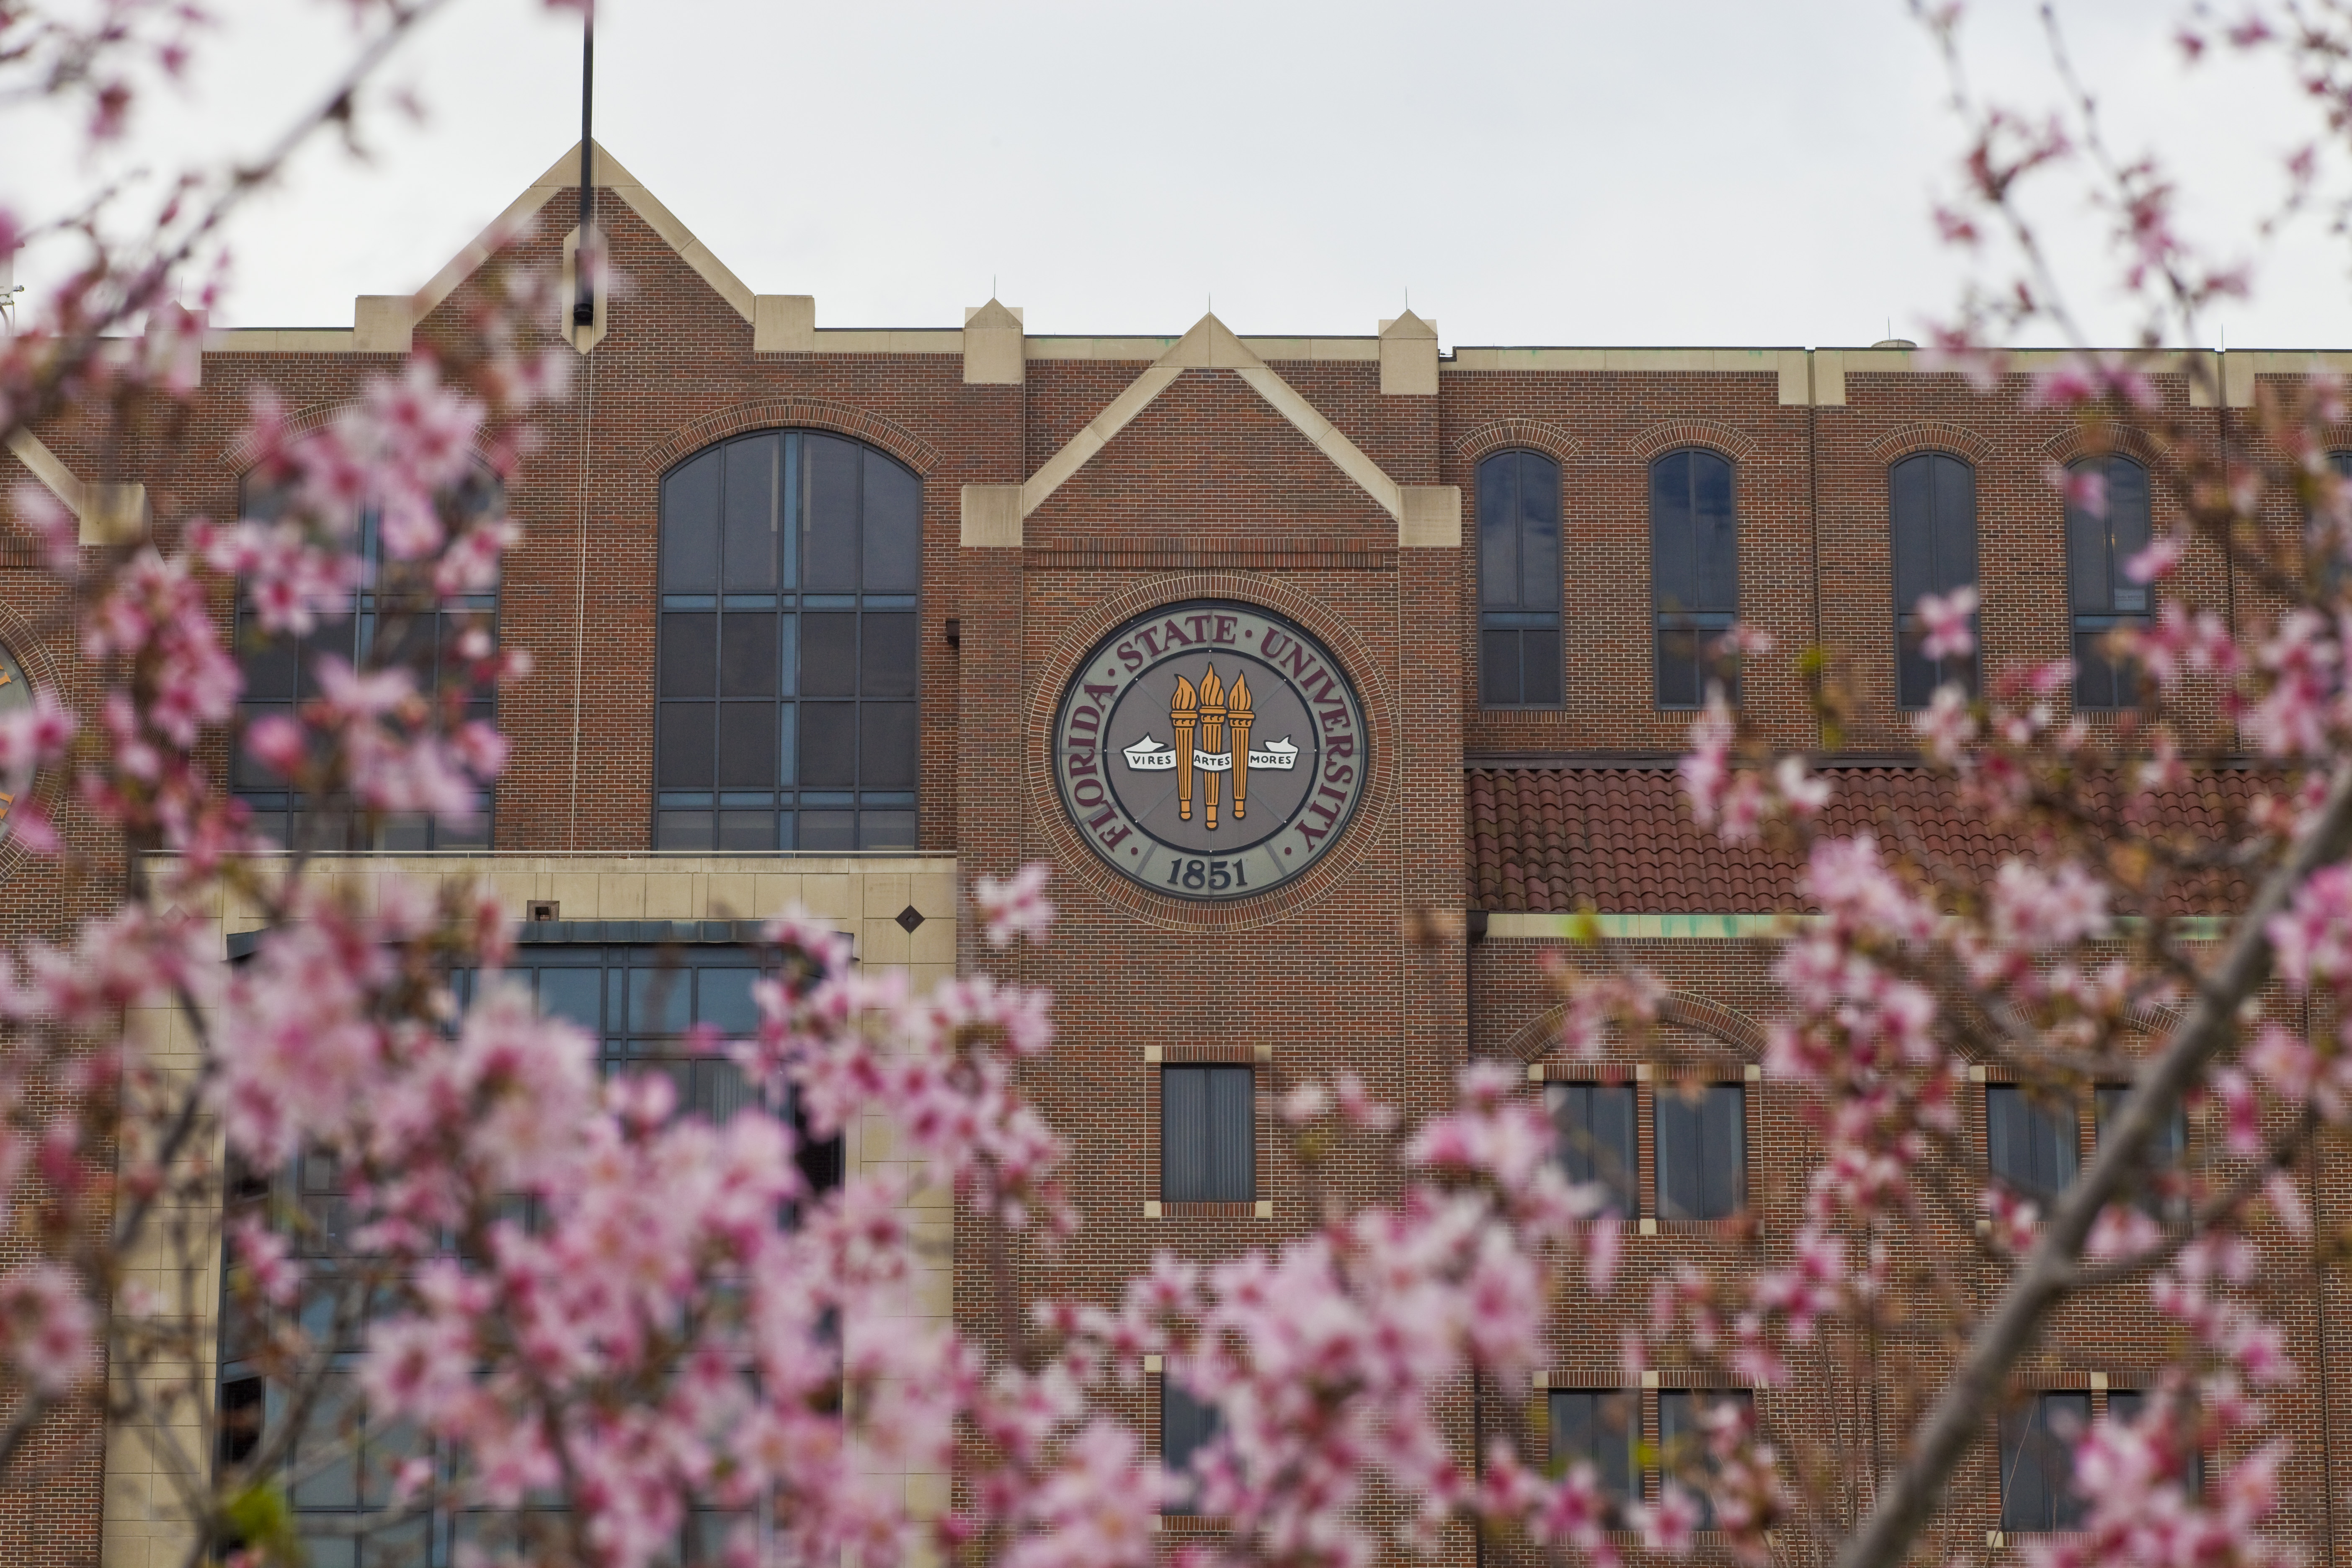 Photo of the University Center with pink blooms in the foreground